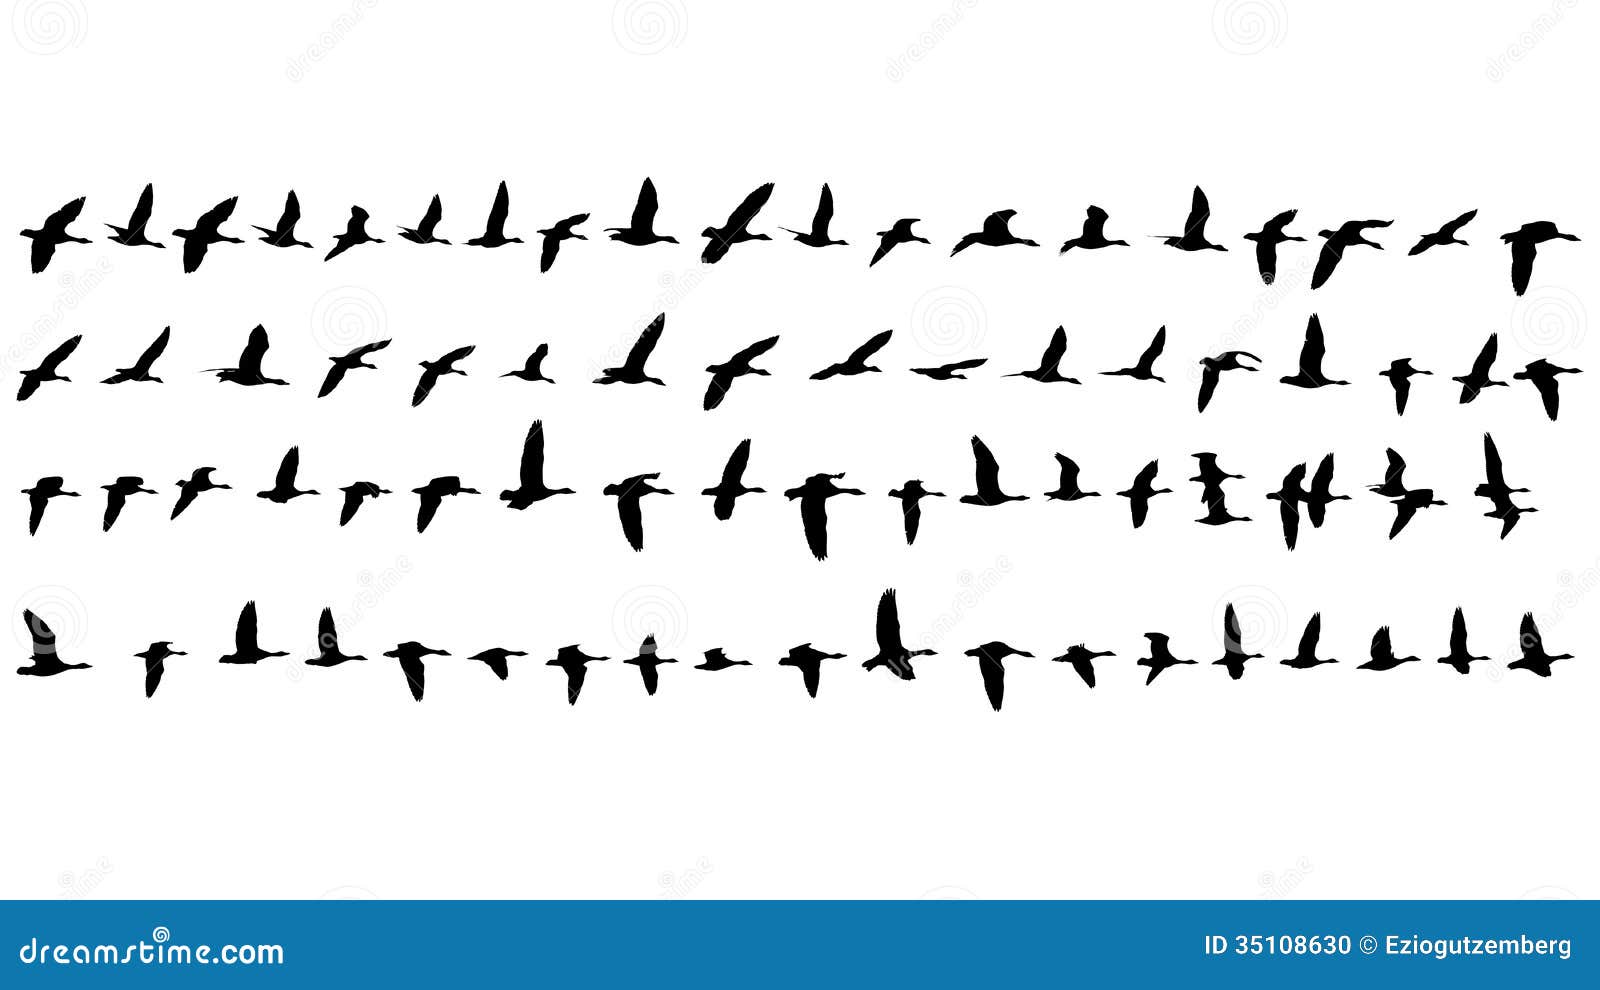 77 silhouettes of flying geese